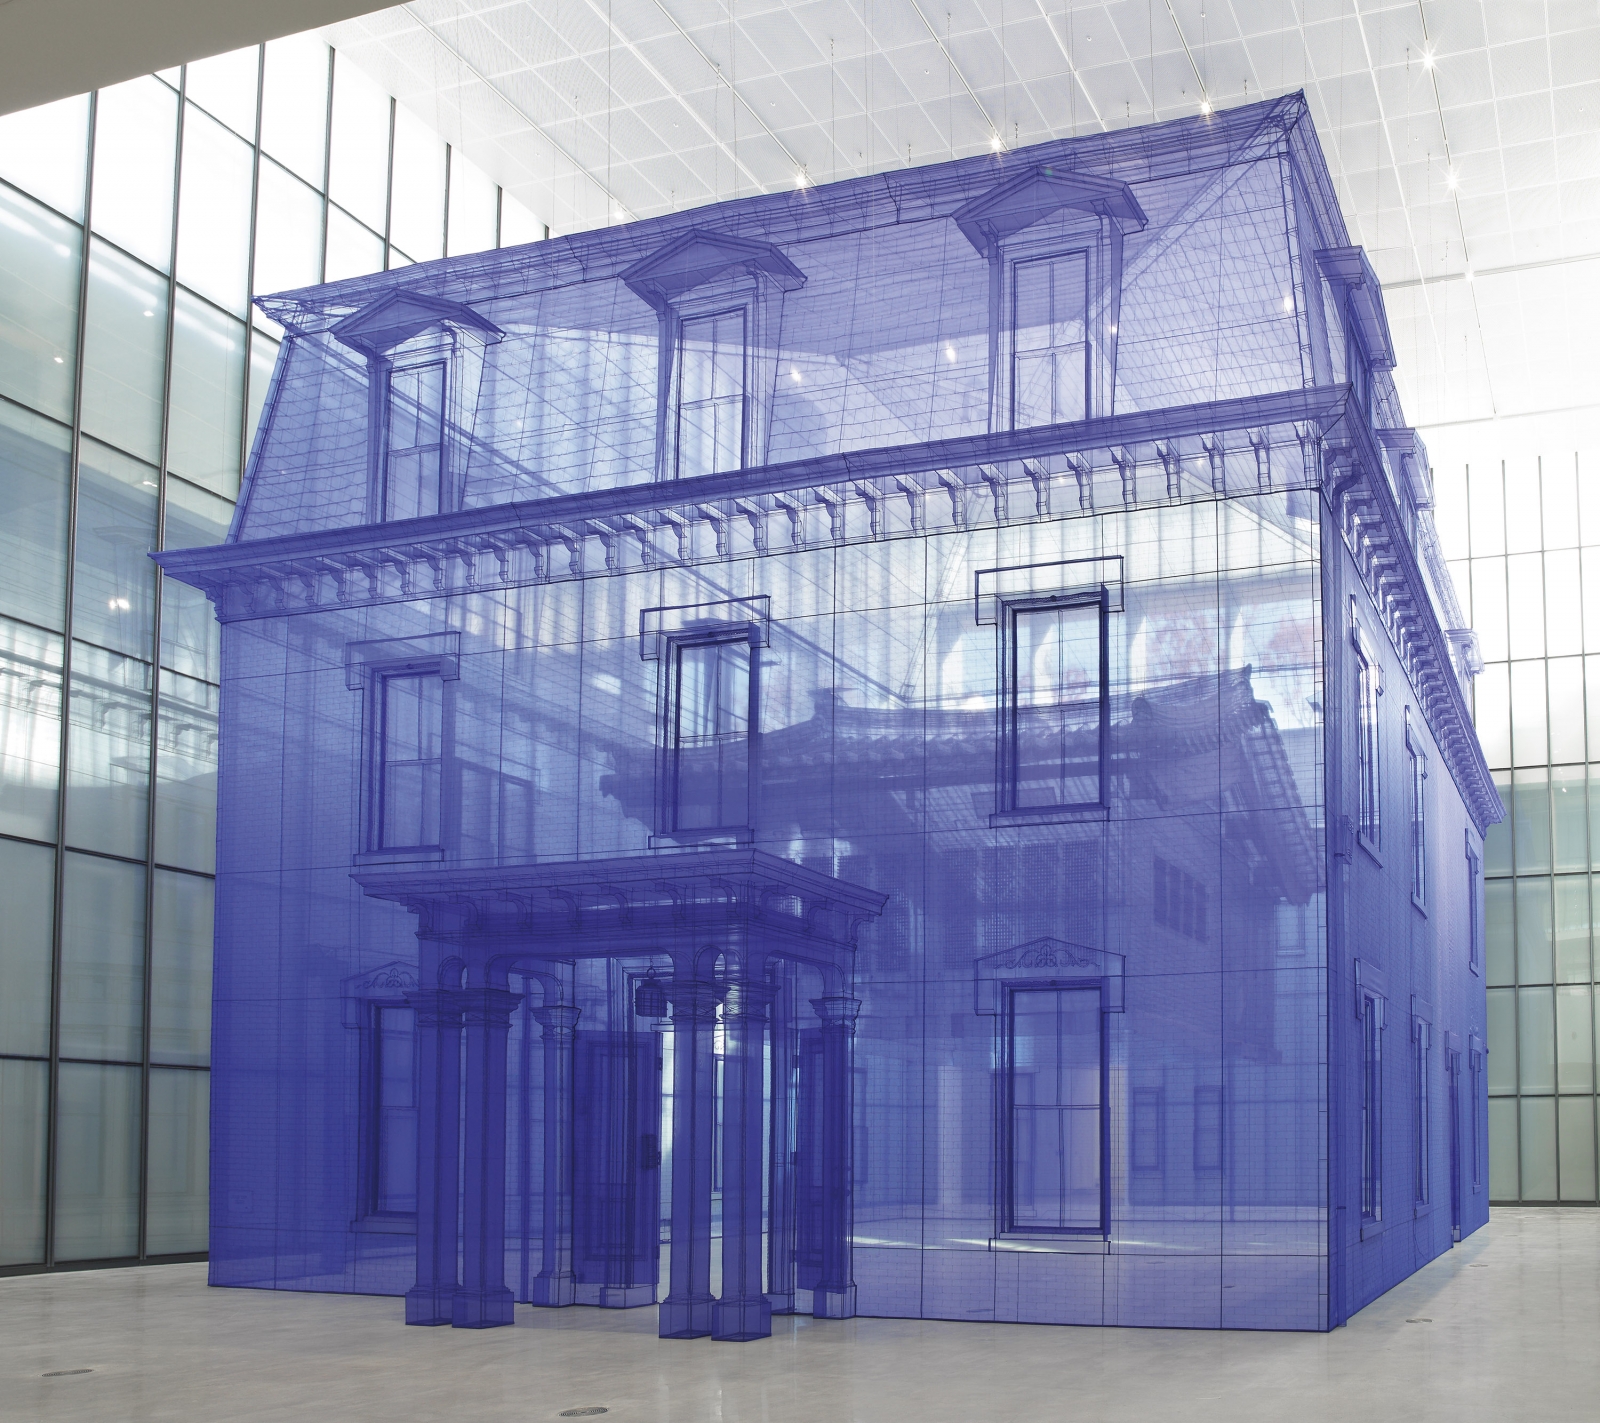 DO HO SUH, Home within Home within Home within Home within Home, 2013